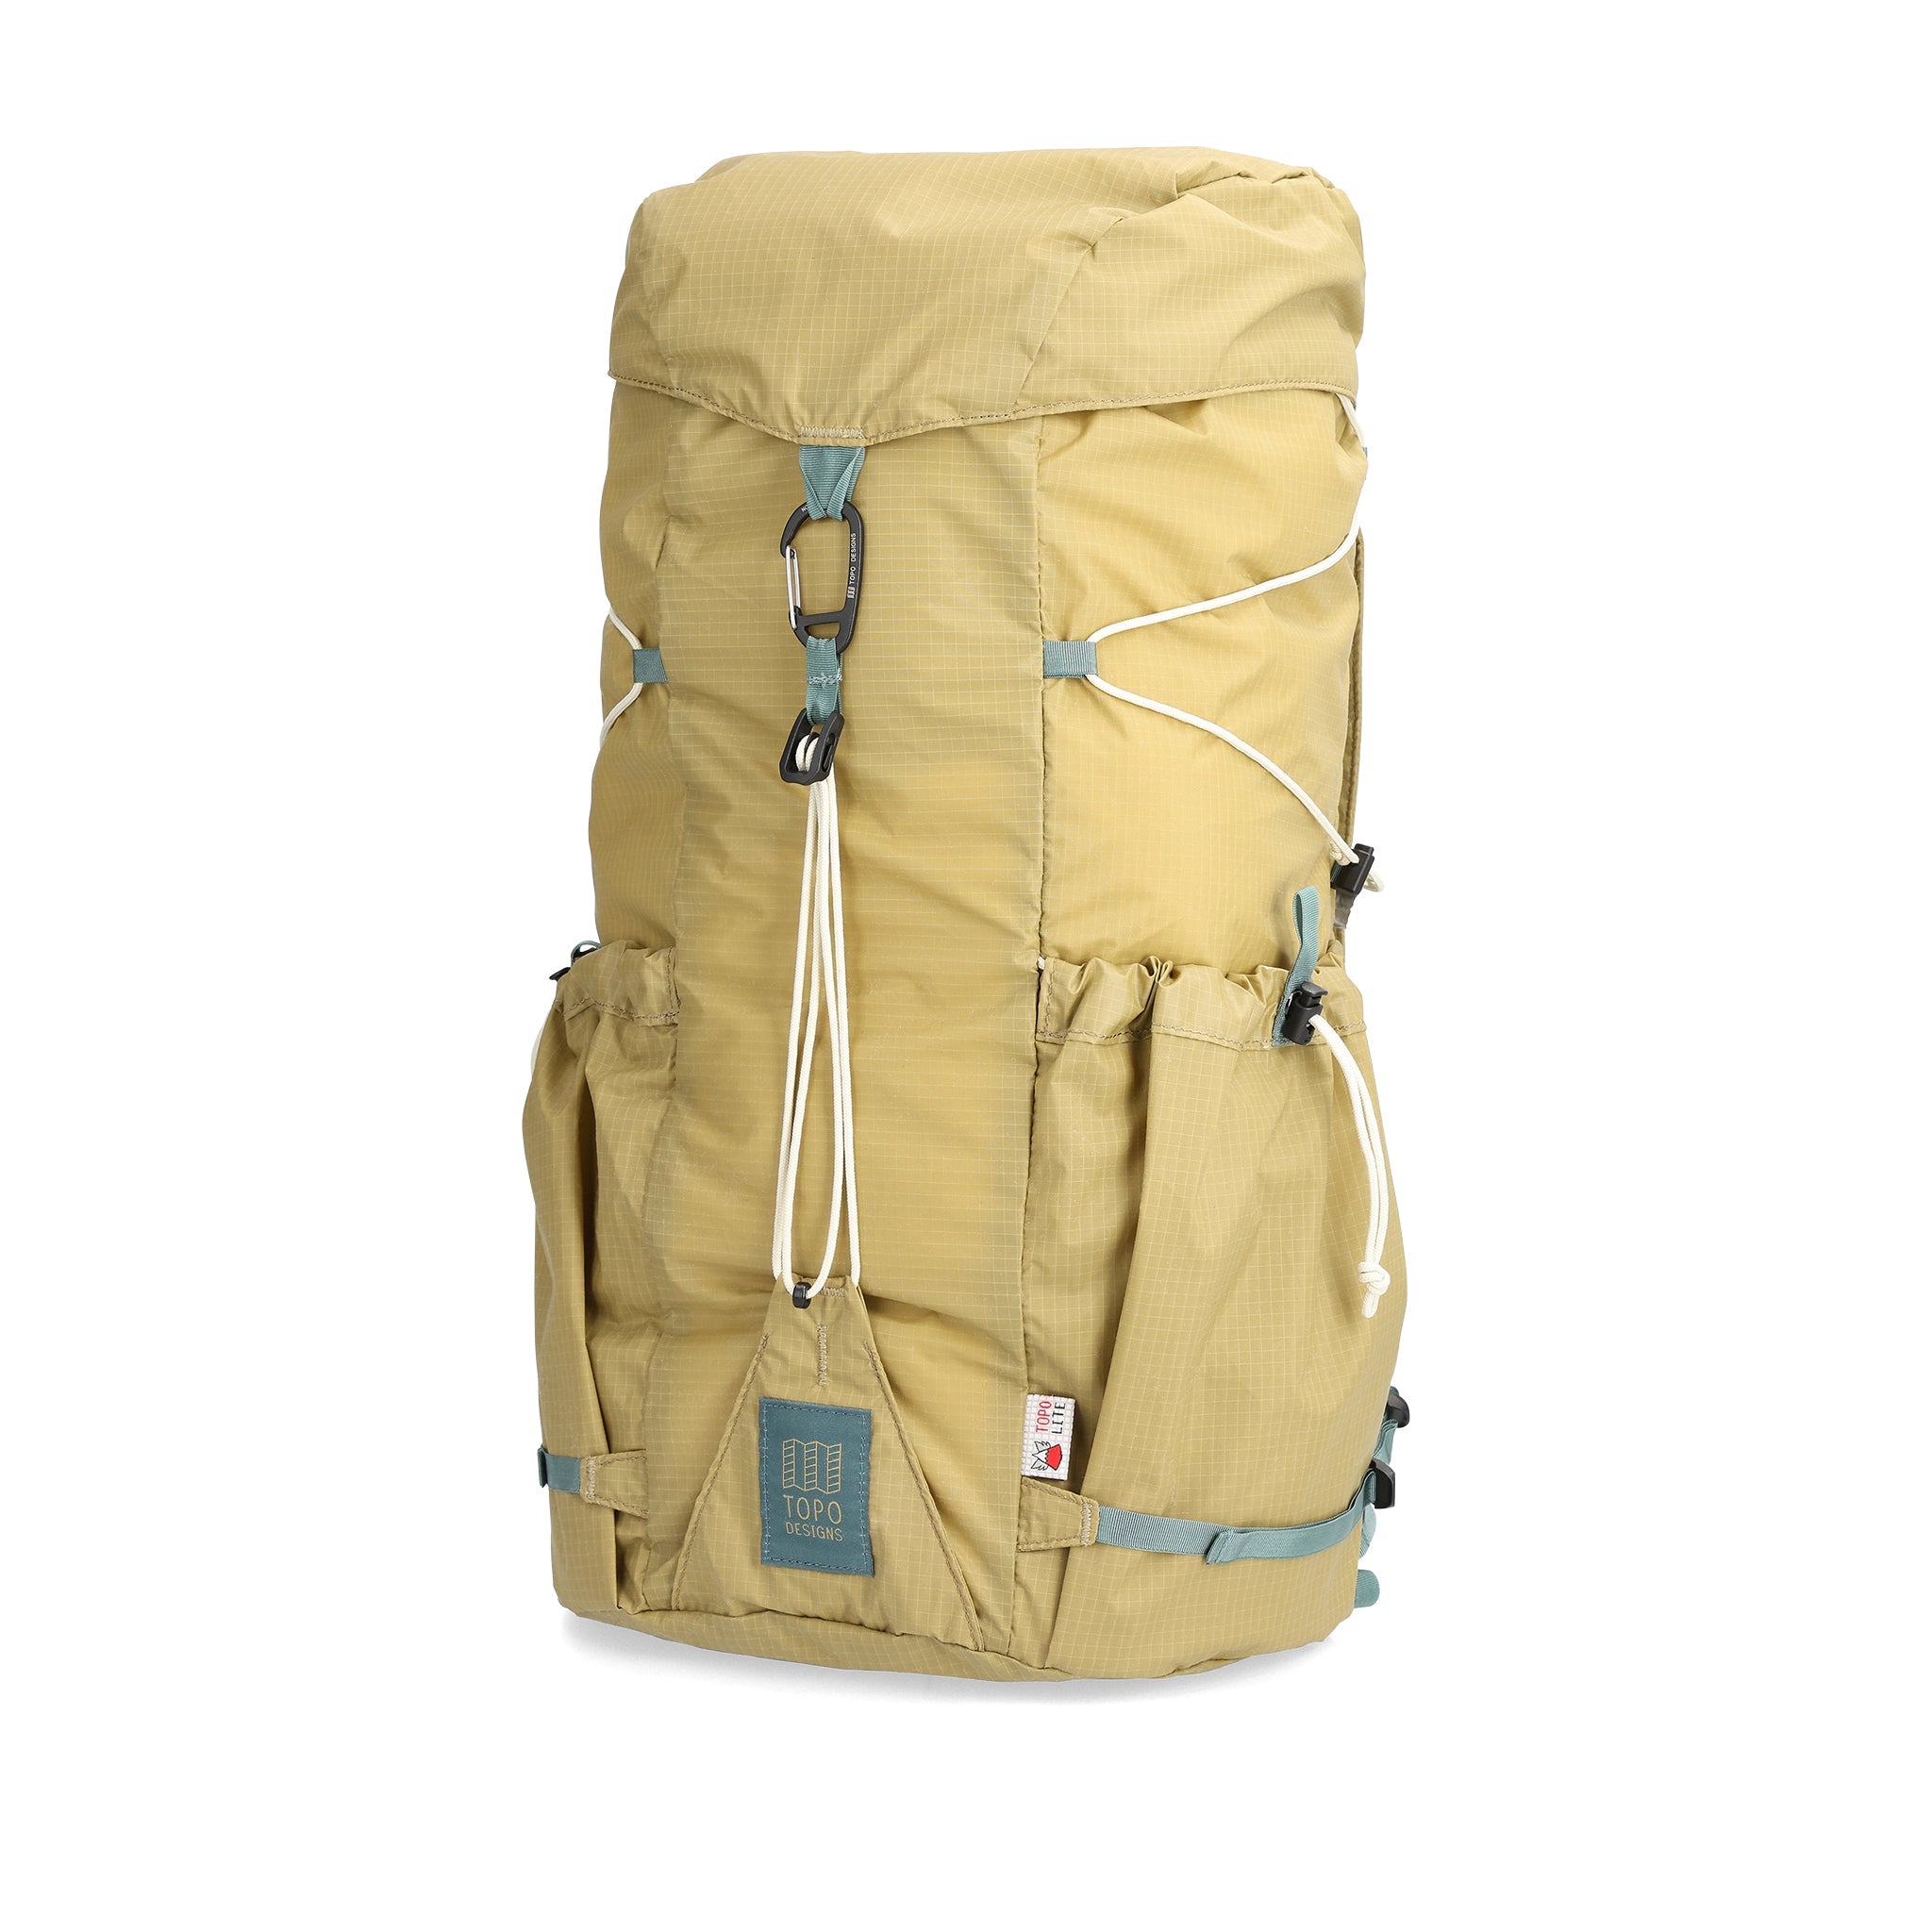 Front View of Topo Designs Topolite™ Cinch Pack 16L in "Moss"